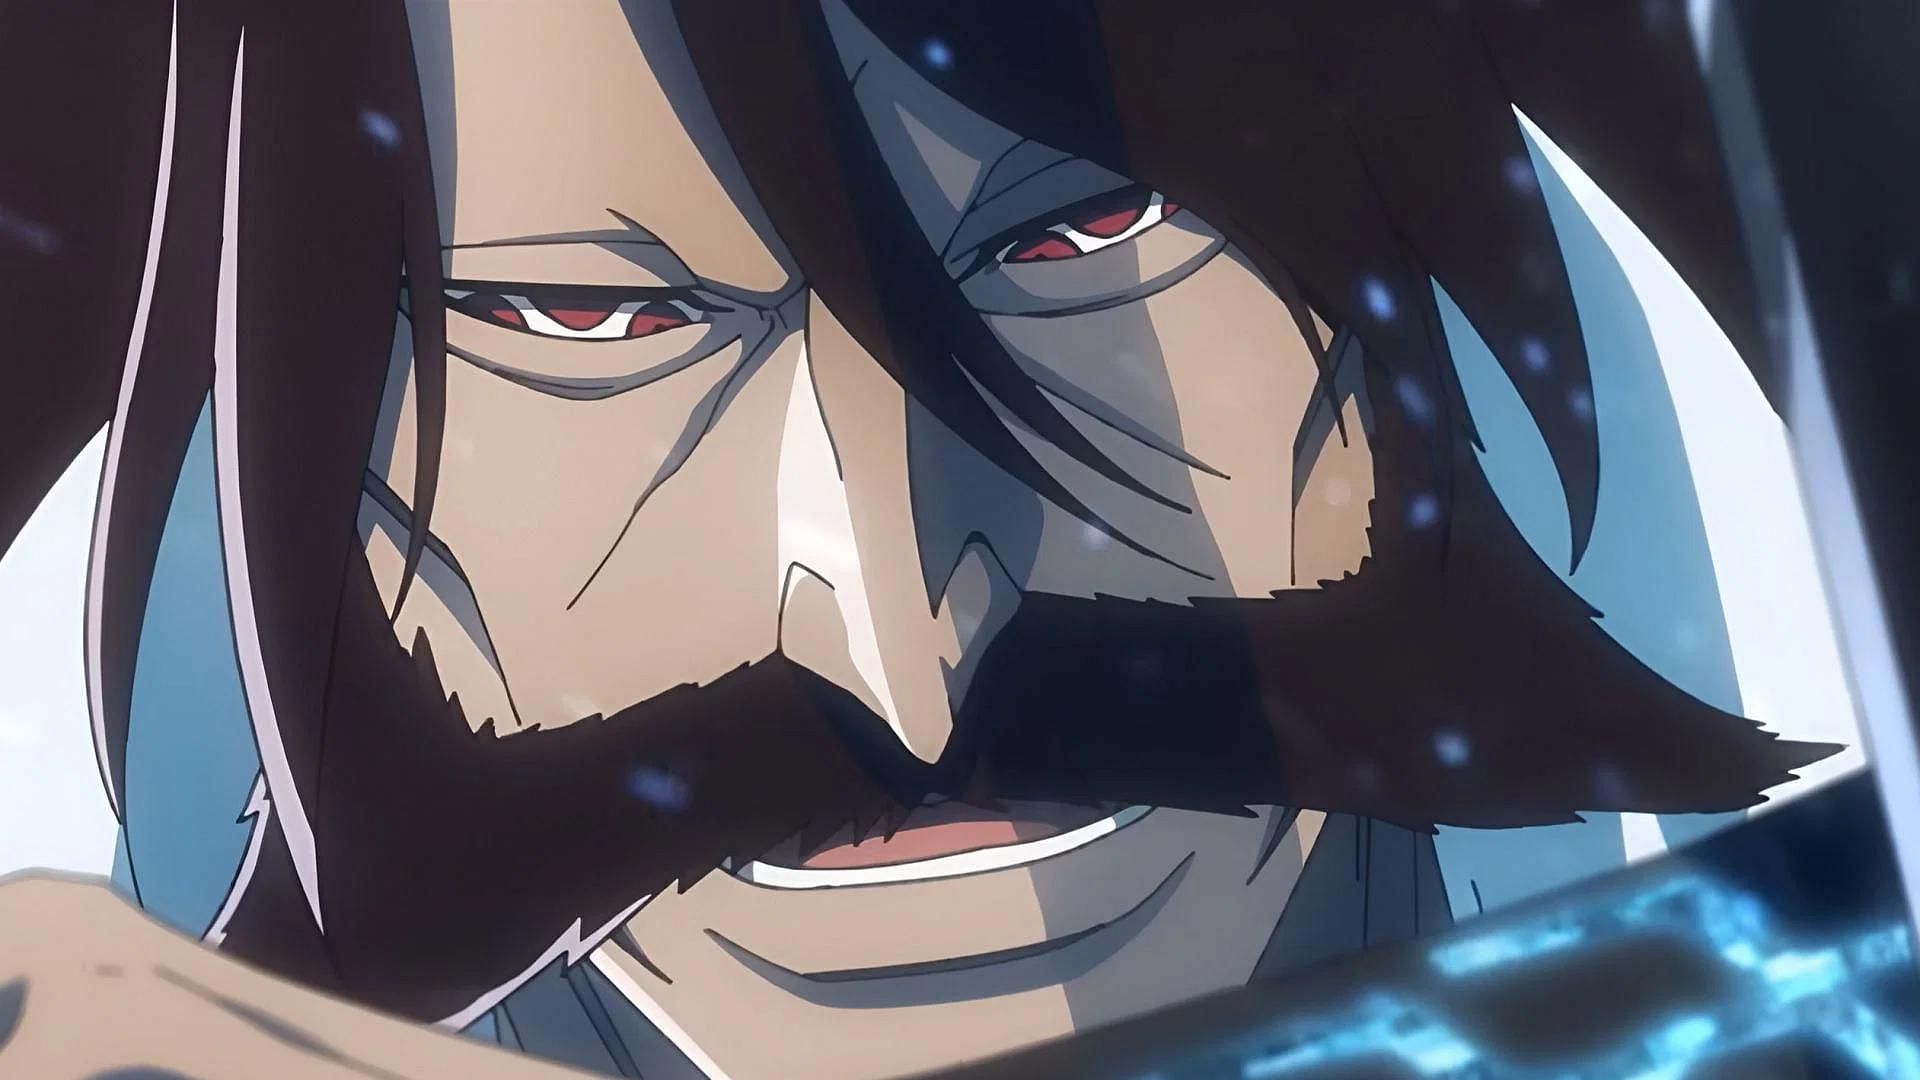 Yhwach as shown in the anime (Image via Studio Pierrot)